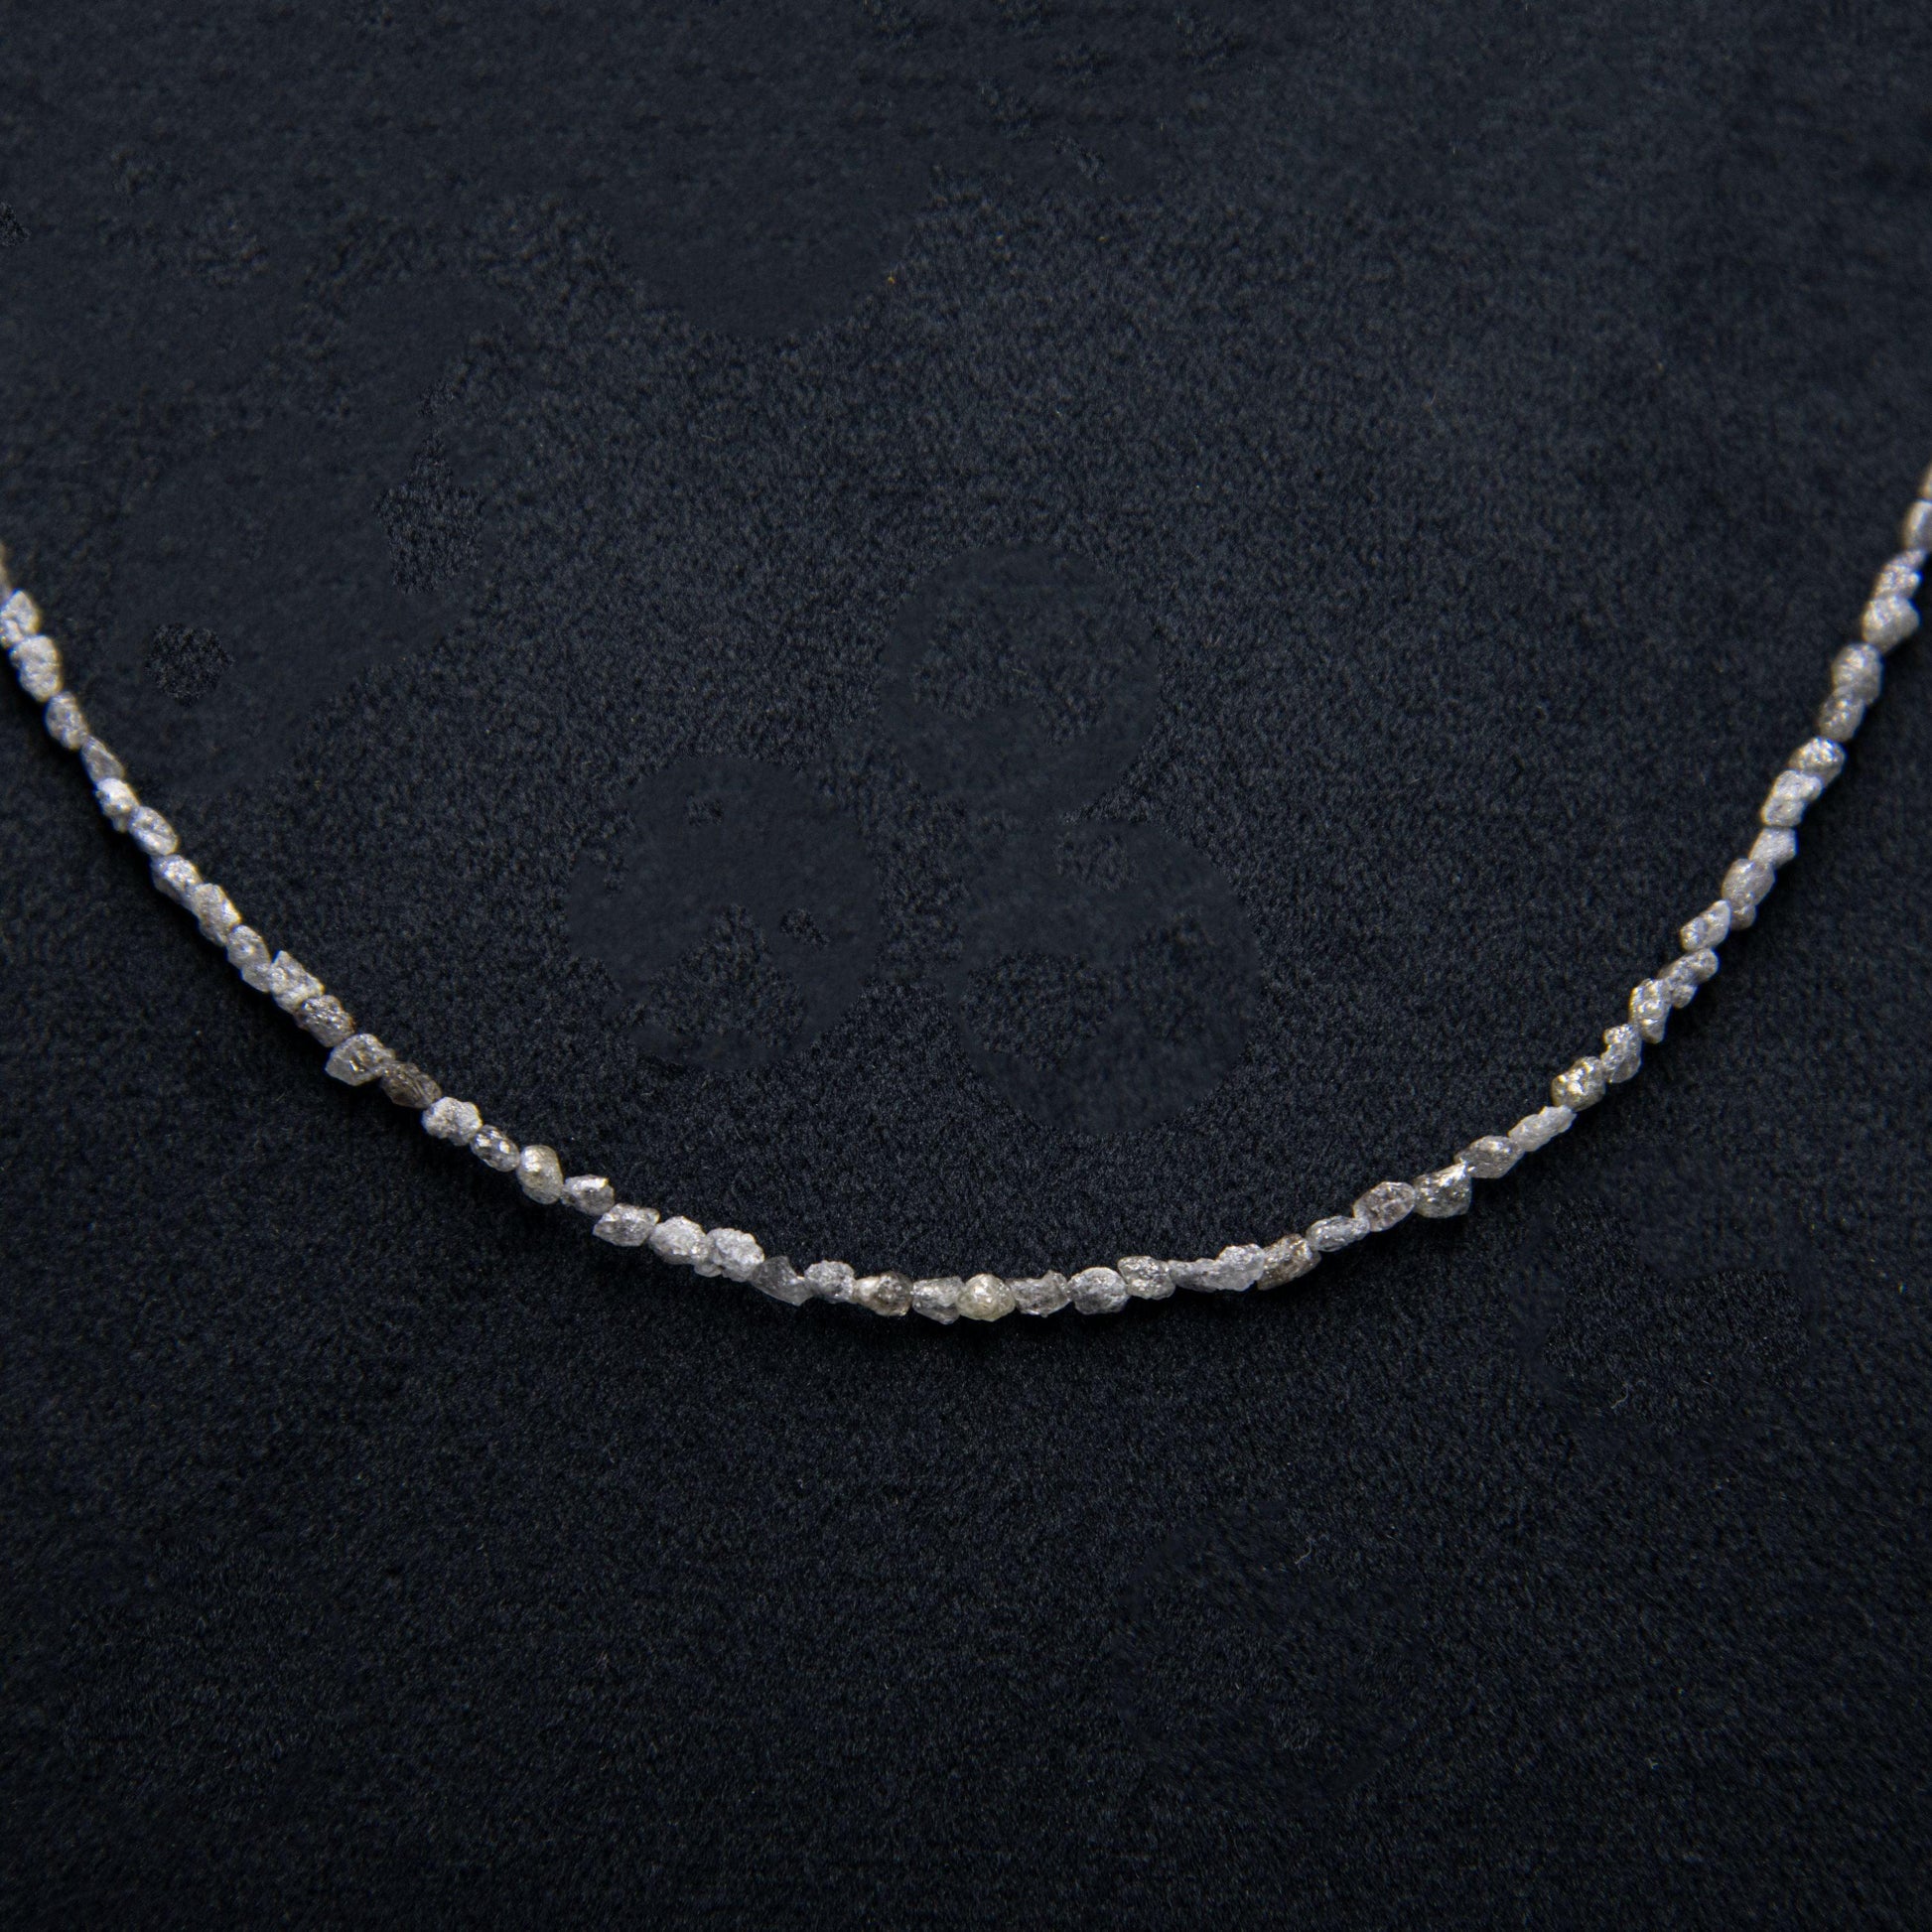 Small Grey Rough Diamond Bead Necklace with Silver Clasp - DeKulture DKW-1379-Small-BNK